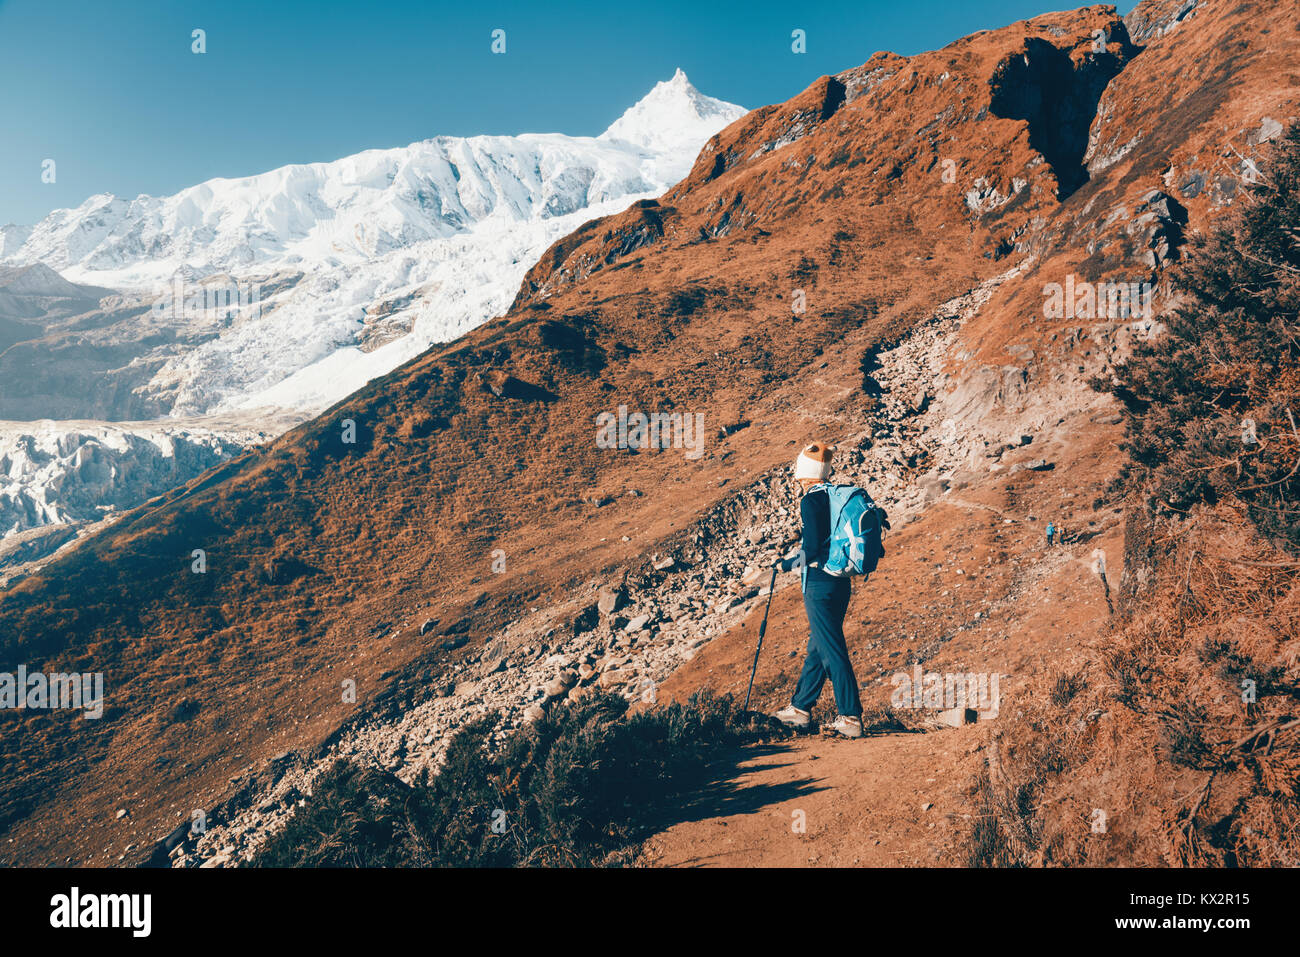 Standing woman with backpack on the mountain trail against snow covered rocks at sunset. Landscape with girl, high mountains with snowy peaks, path, b Stock Photo